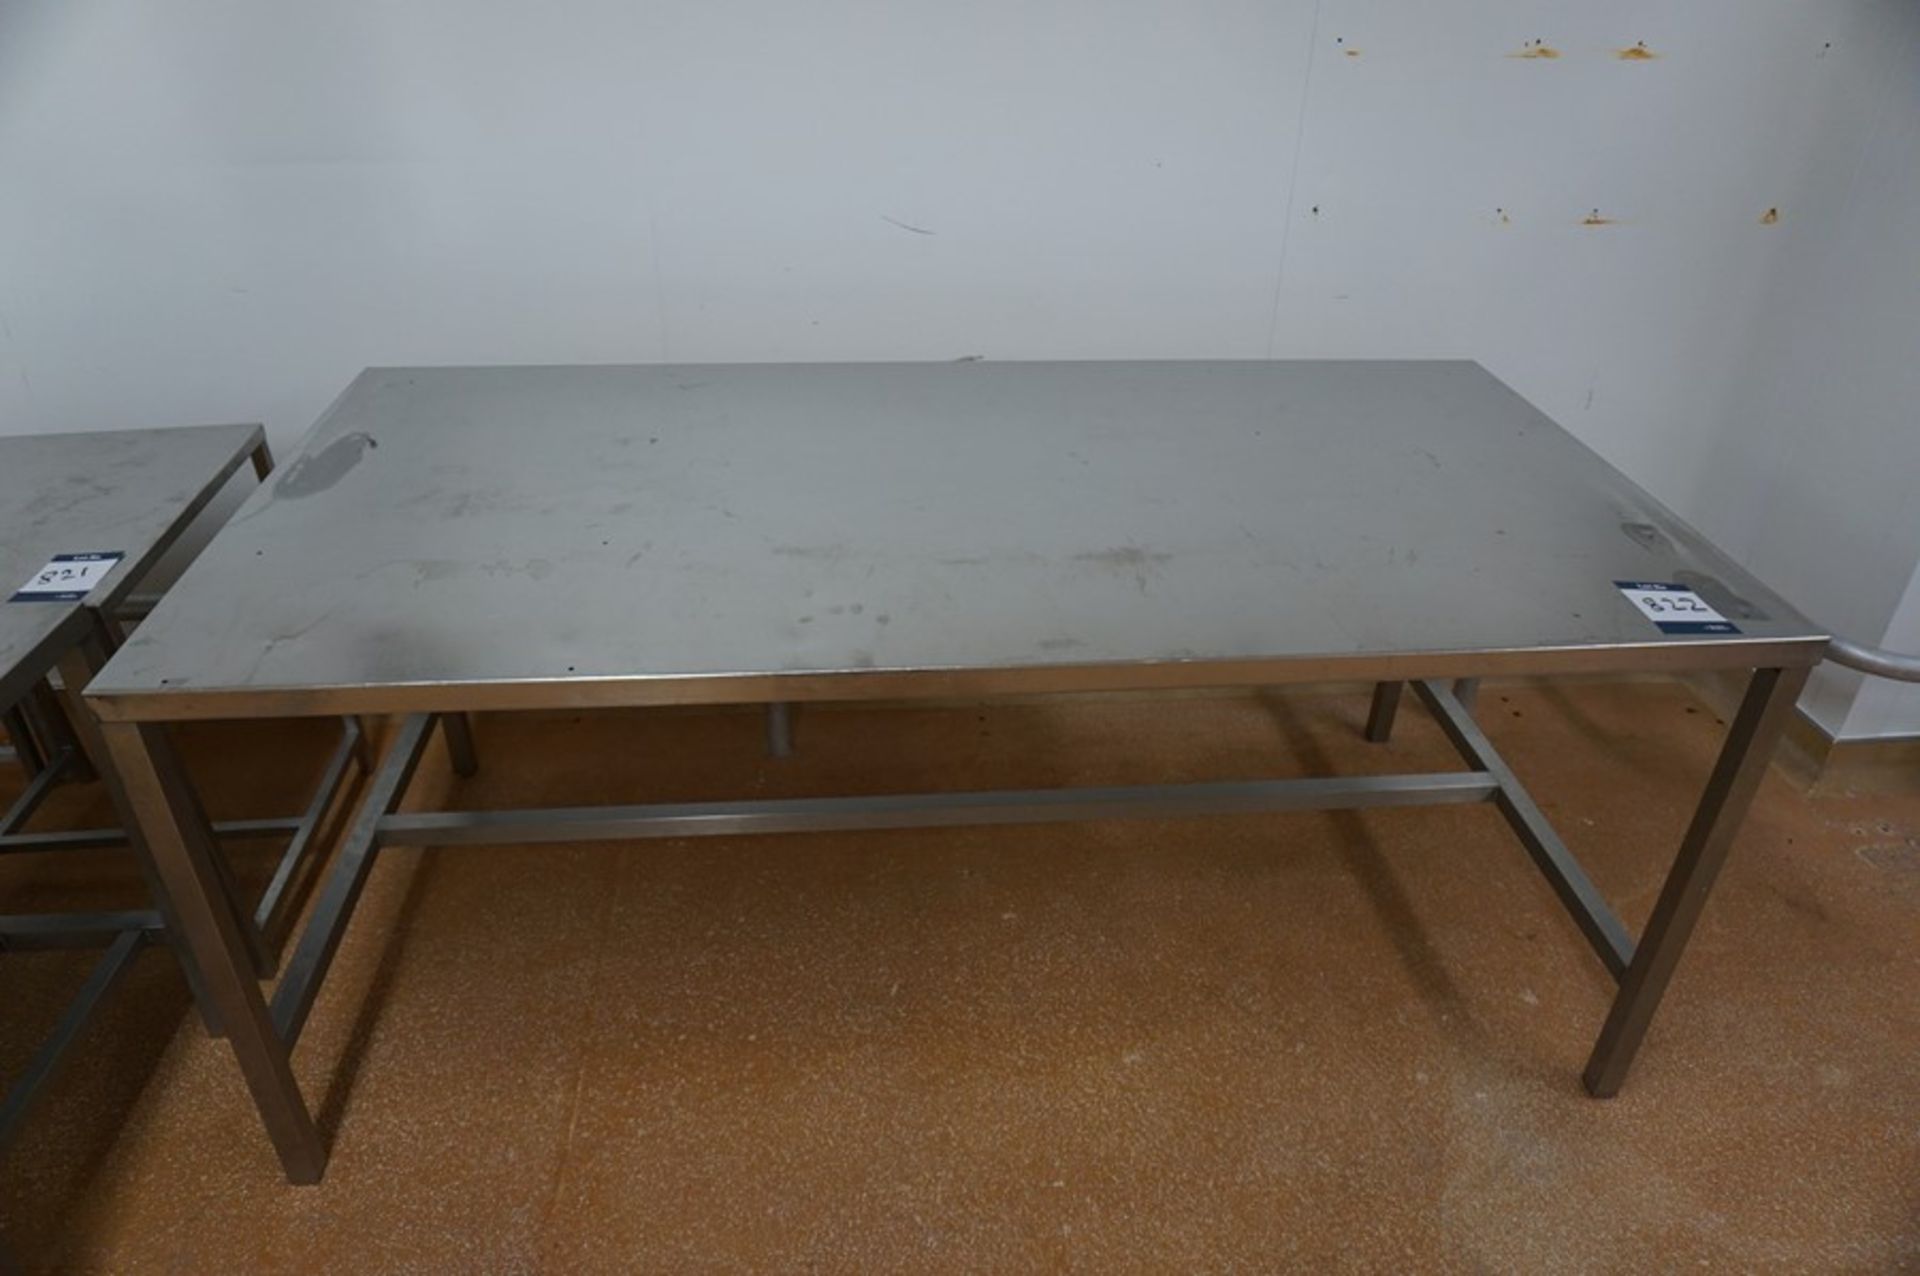 2 x Various stainless steel prep tables, each 1m x 2m x 0.86m (h) as lotted - Image 3 of 4